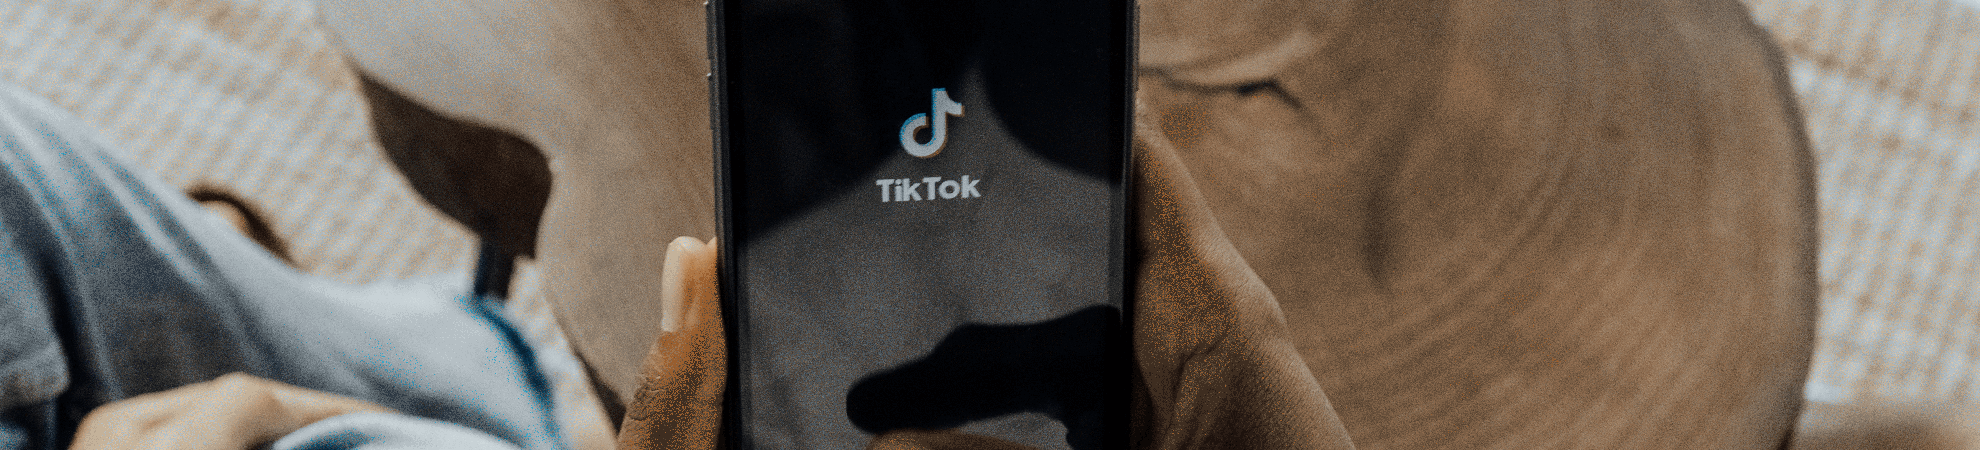 Woman using TikTok on a mobile phone with 4G mobile proxy VPN